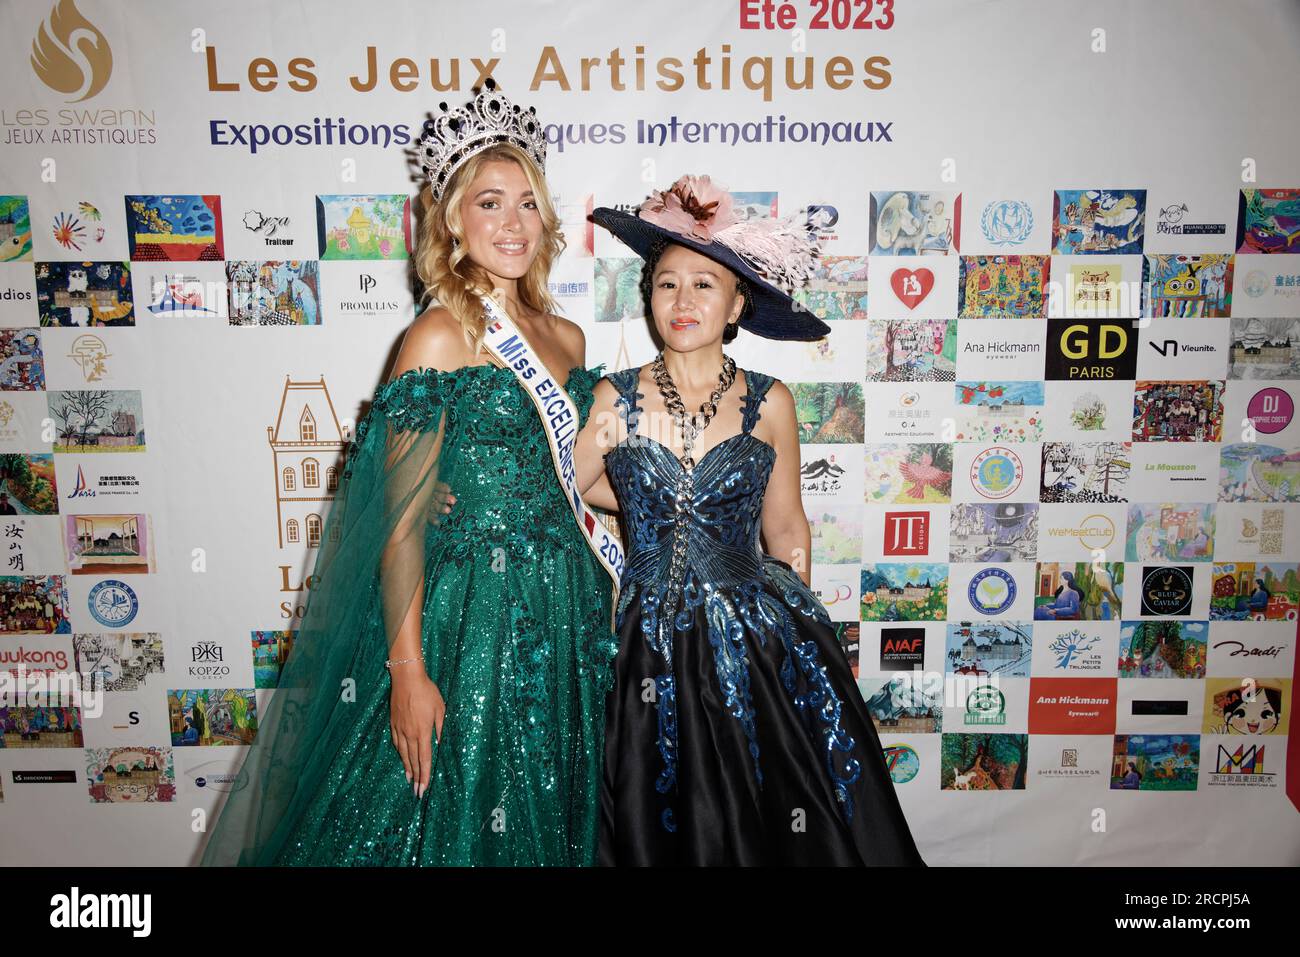 Paris, France. 15th July, 2023. Miss Excellence France 2023, Laura Hérault and the chinese artist Li Jin Paris attend the second edition of the Artistic Games at the Caroussel du Louvre on July 15, 2023 in Paris, France. Credit: Bernard Menigault/Alamy Live News Stock Photo